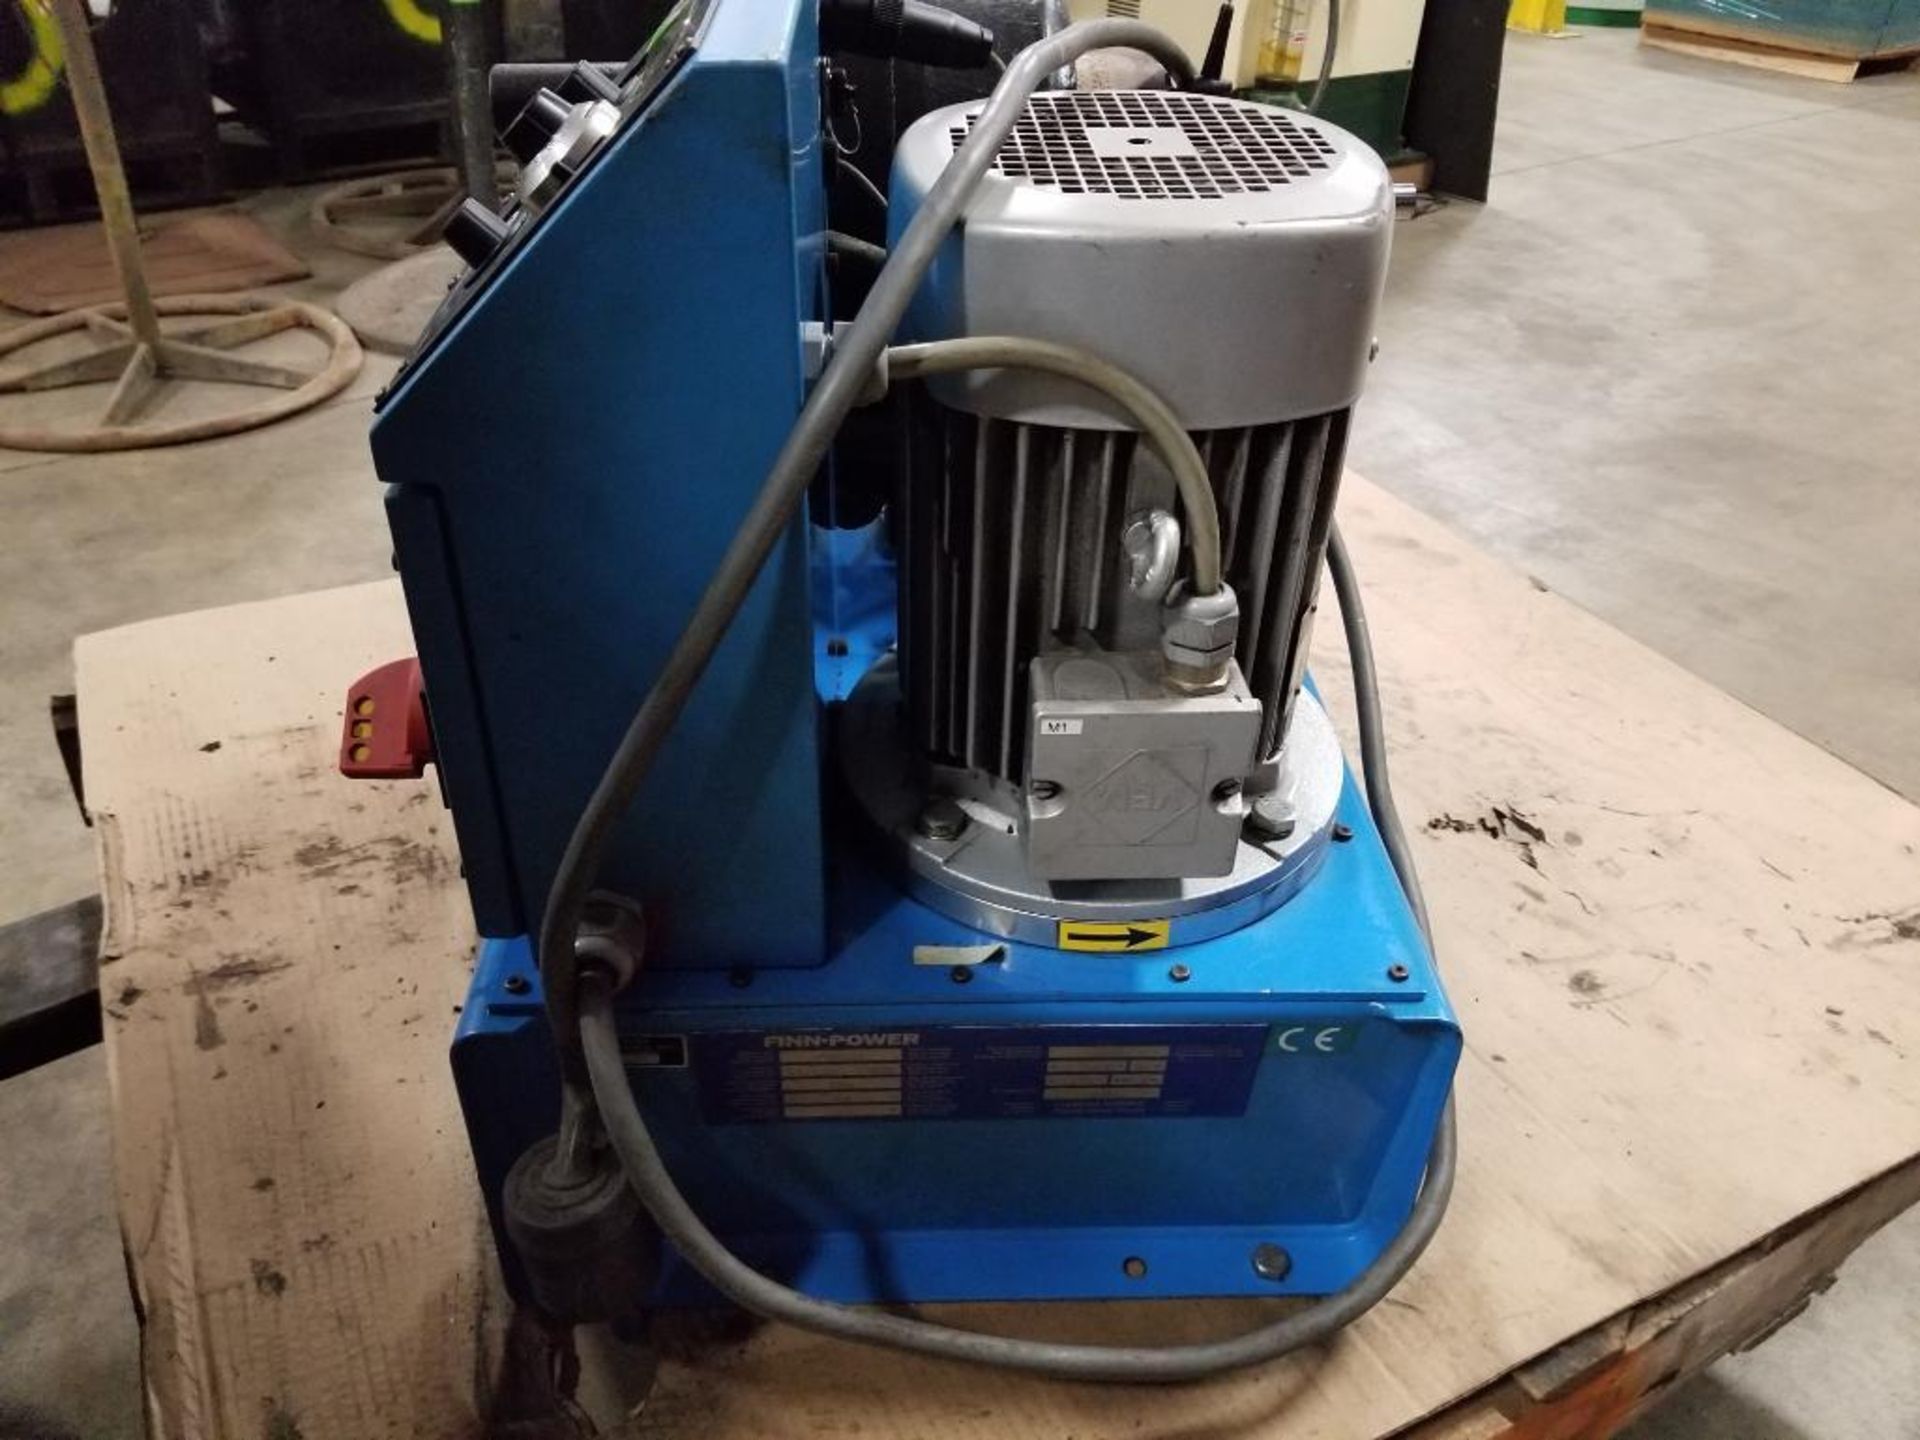 Finn-Power hydraulic swaging crimping machine. Model P20, Part number P20IS23. Mfg date 2005. - Image 16 of 16